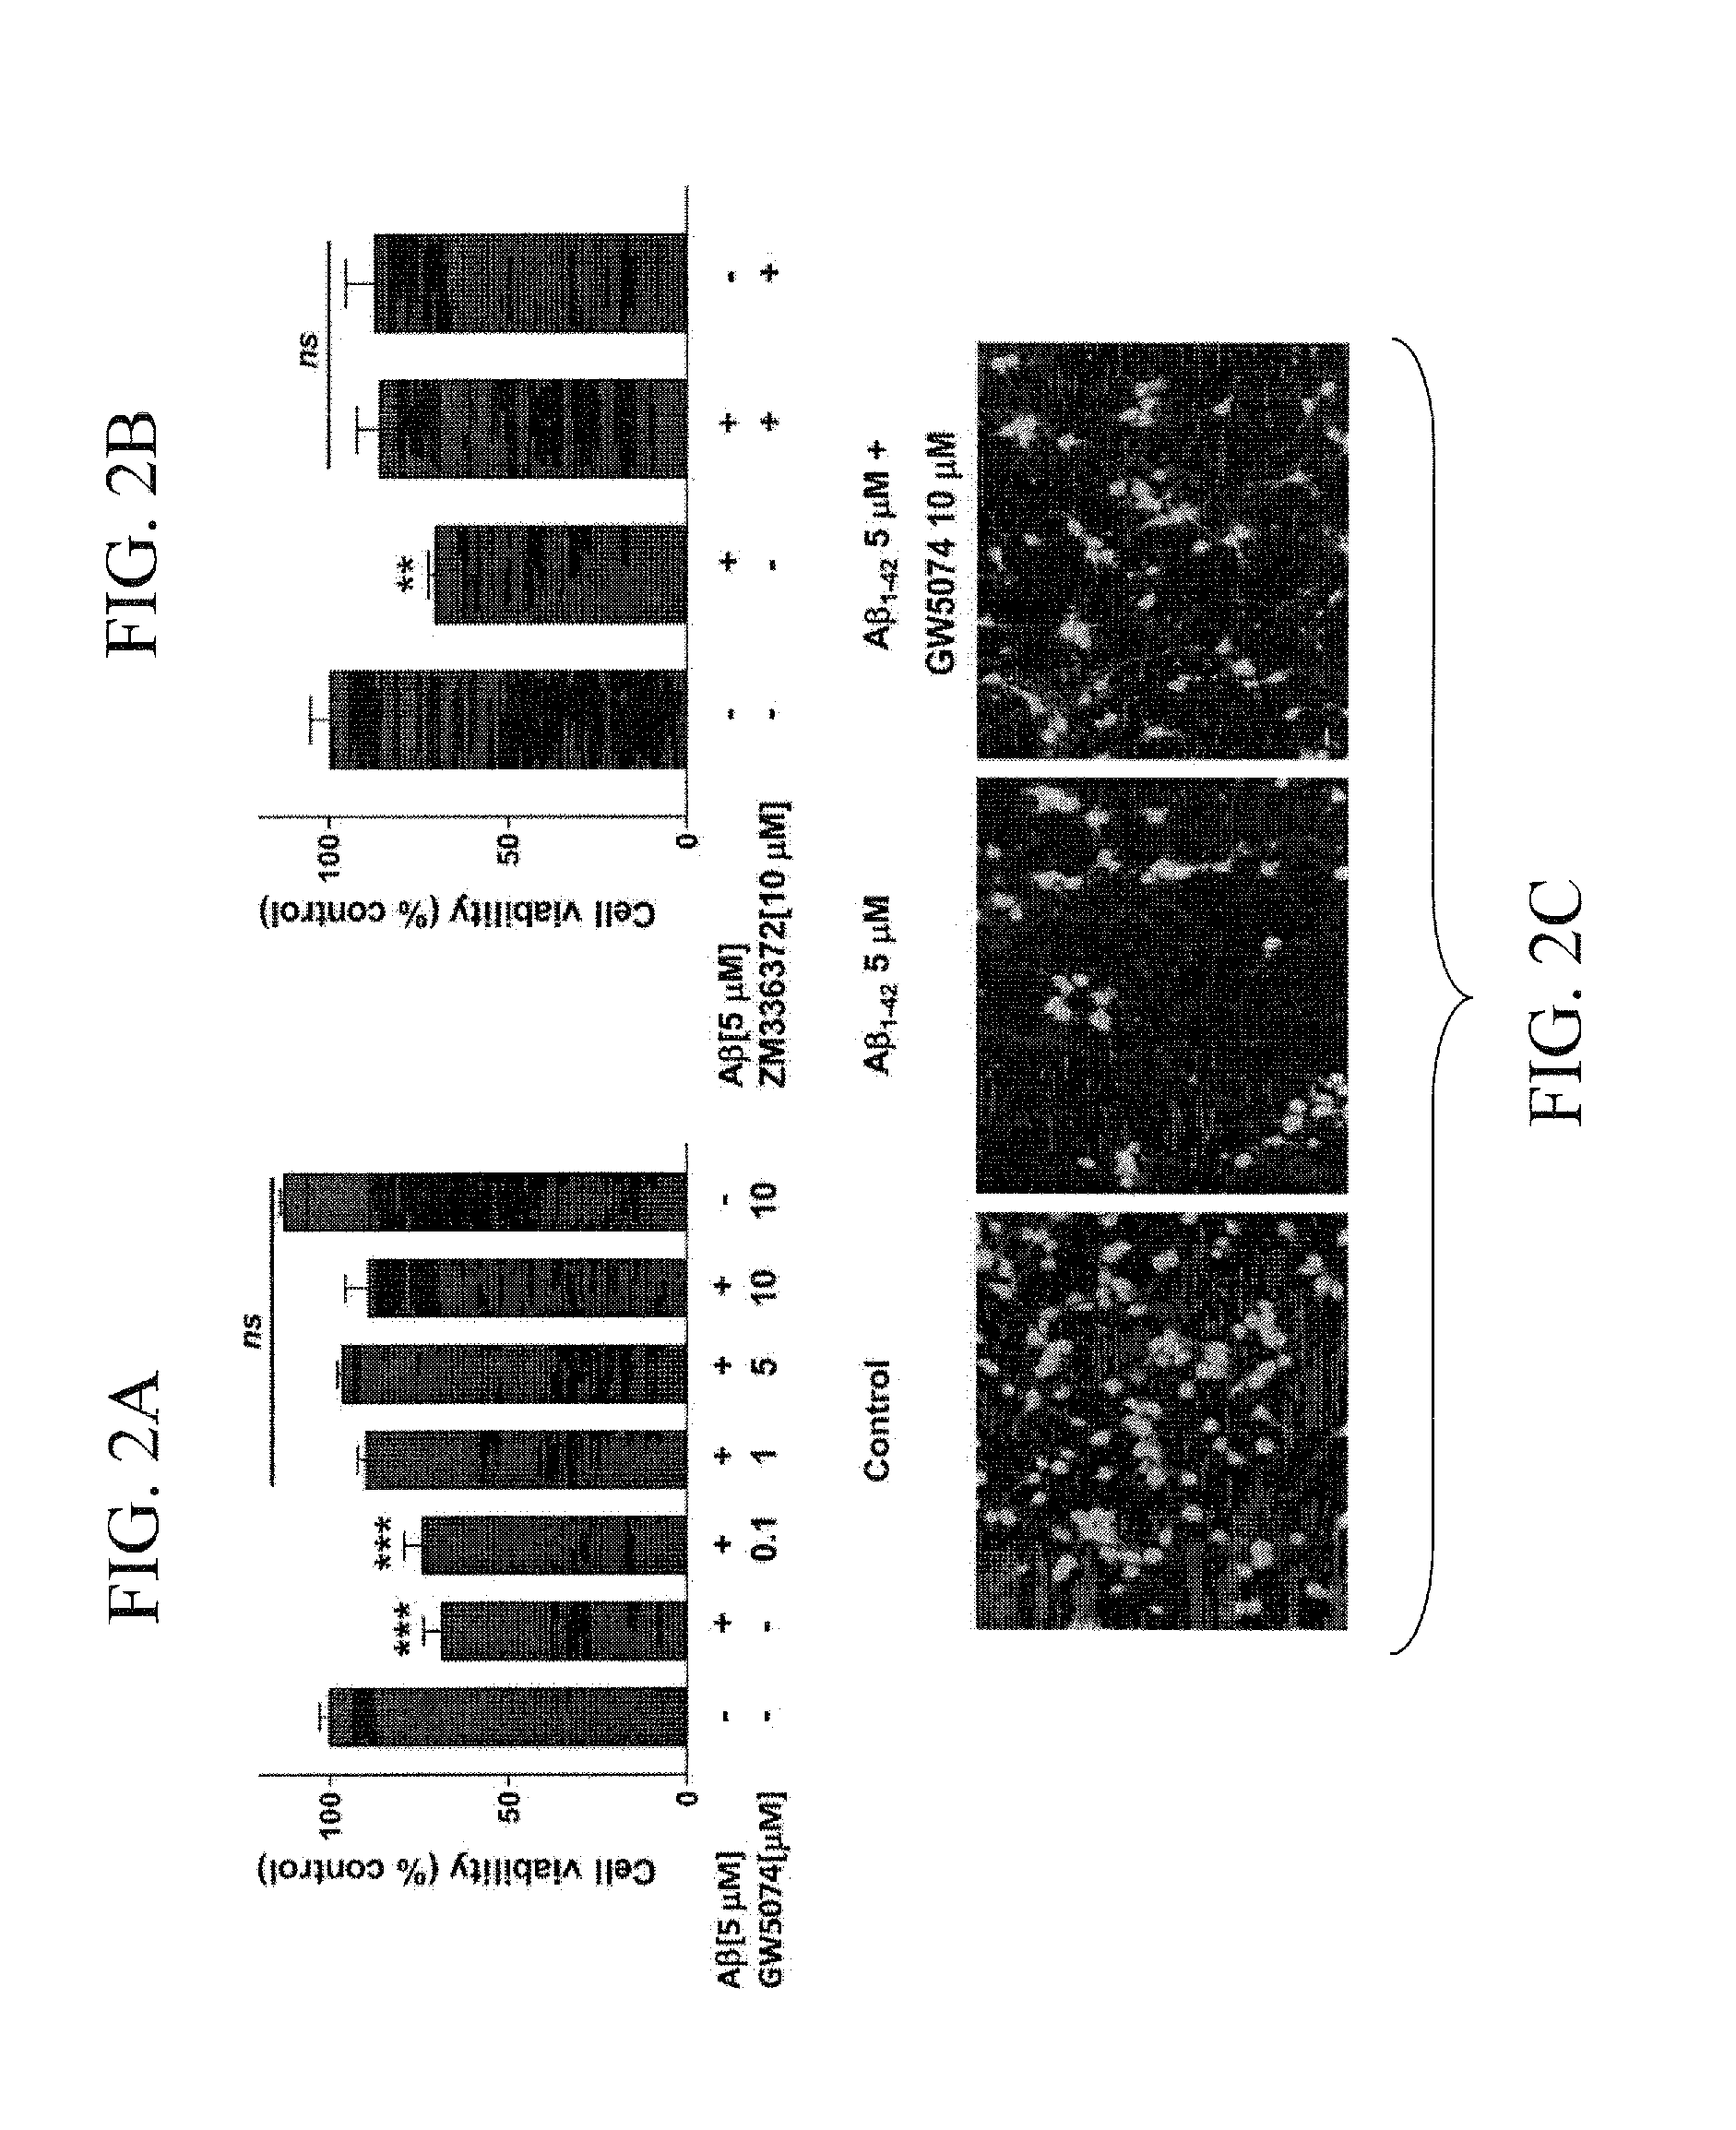 Materials and methods for preventing or treating neurodegenerative conditions associated with abeta peptide accumulation